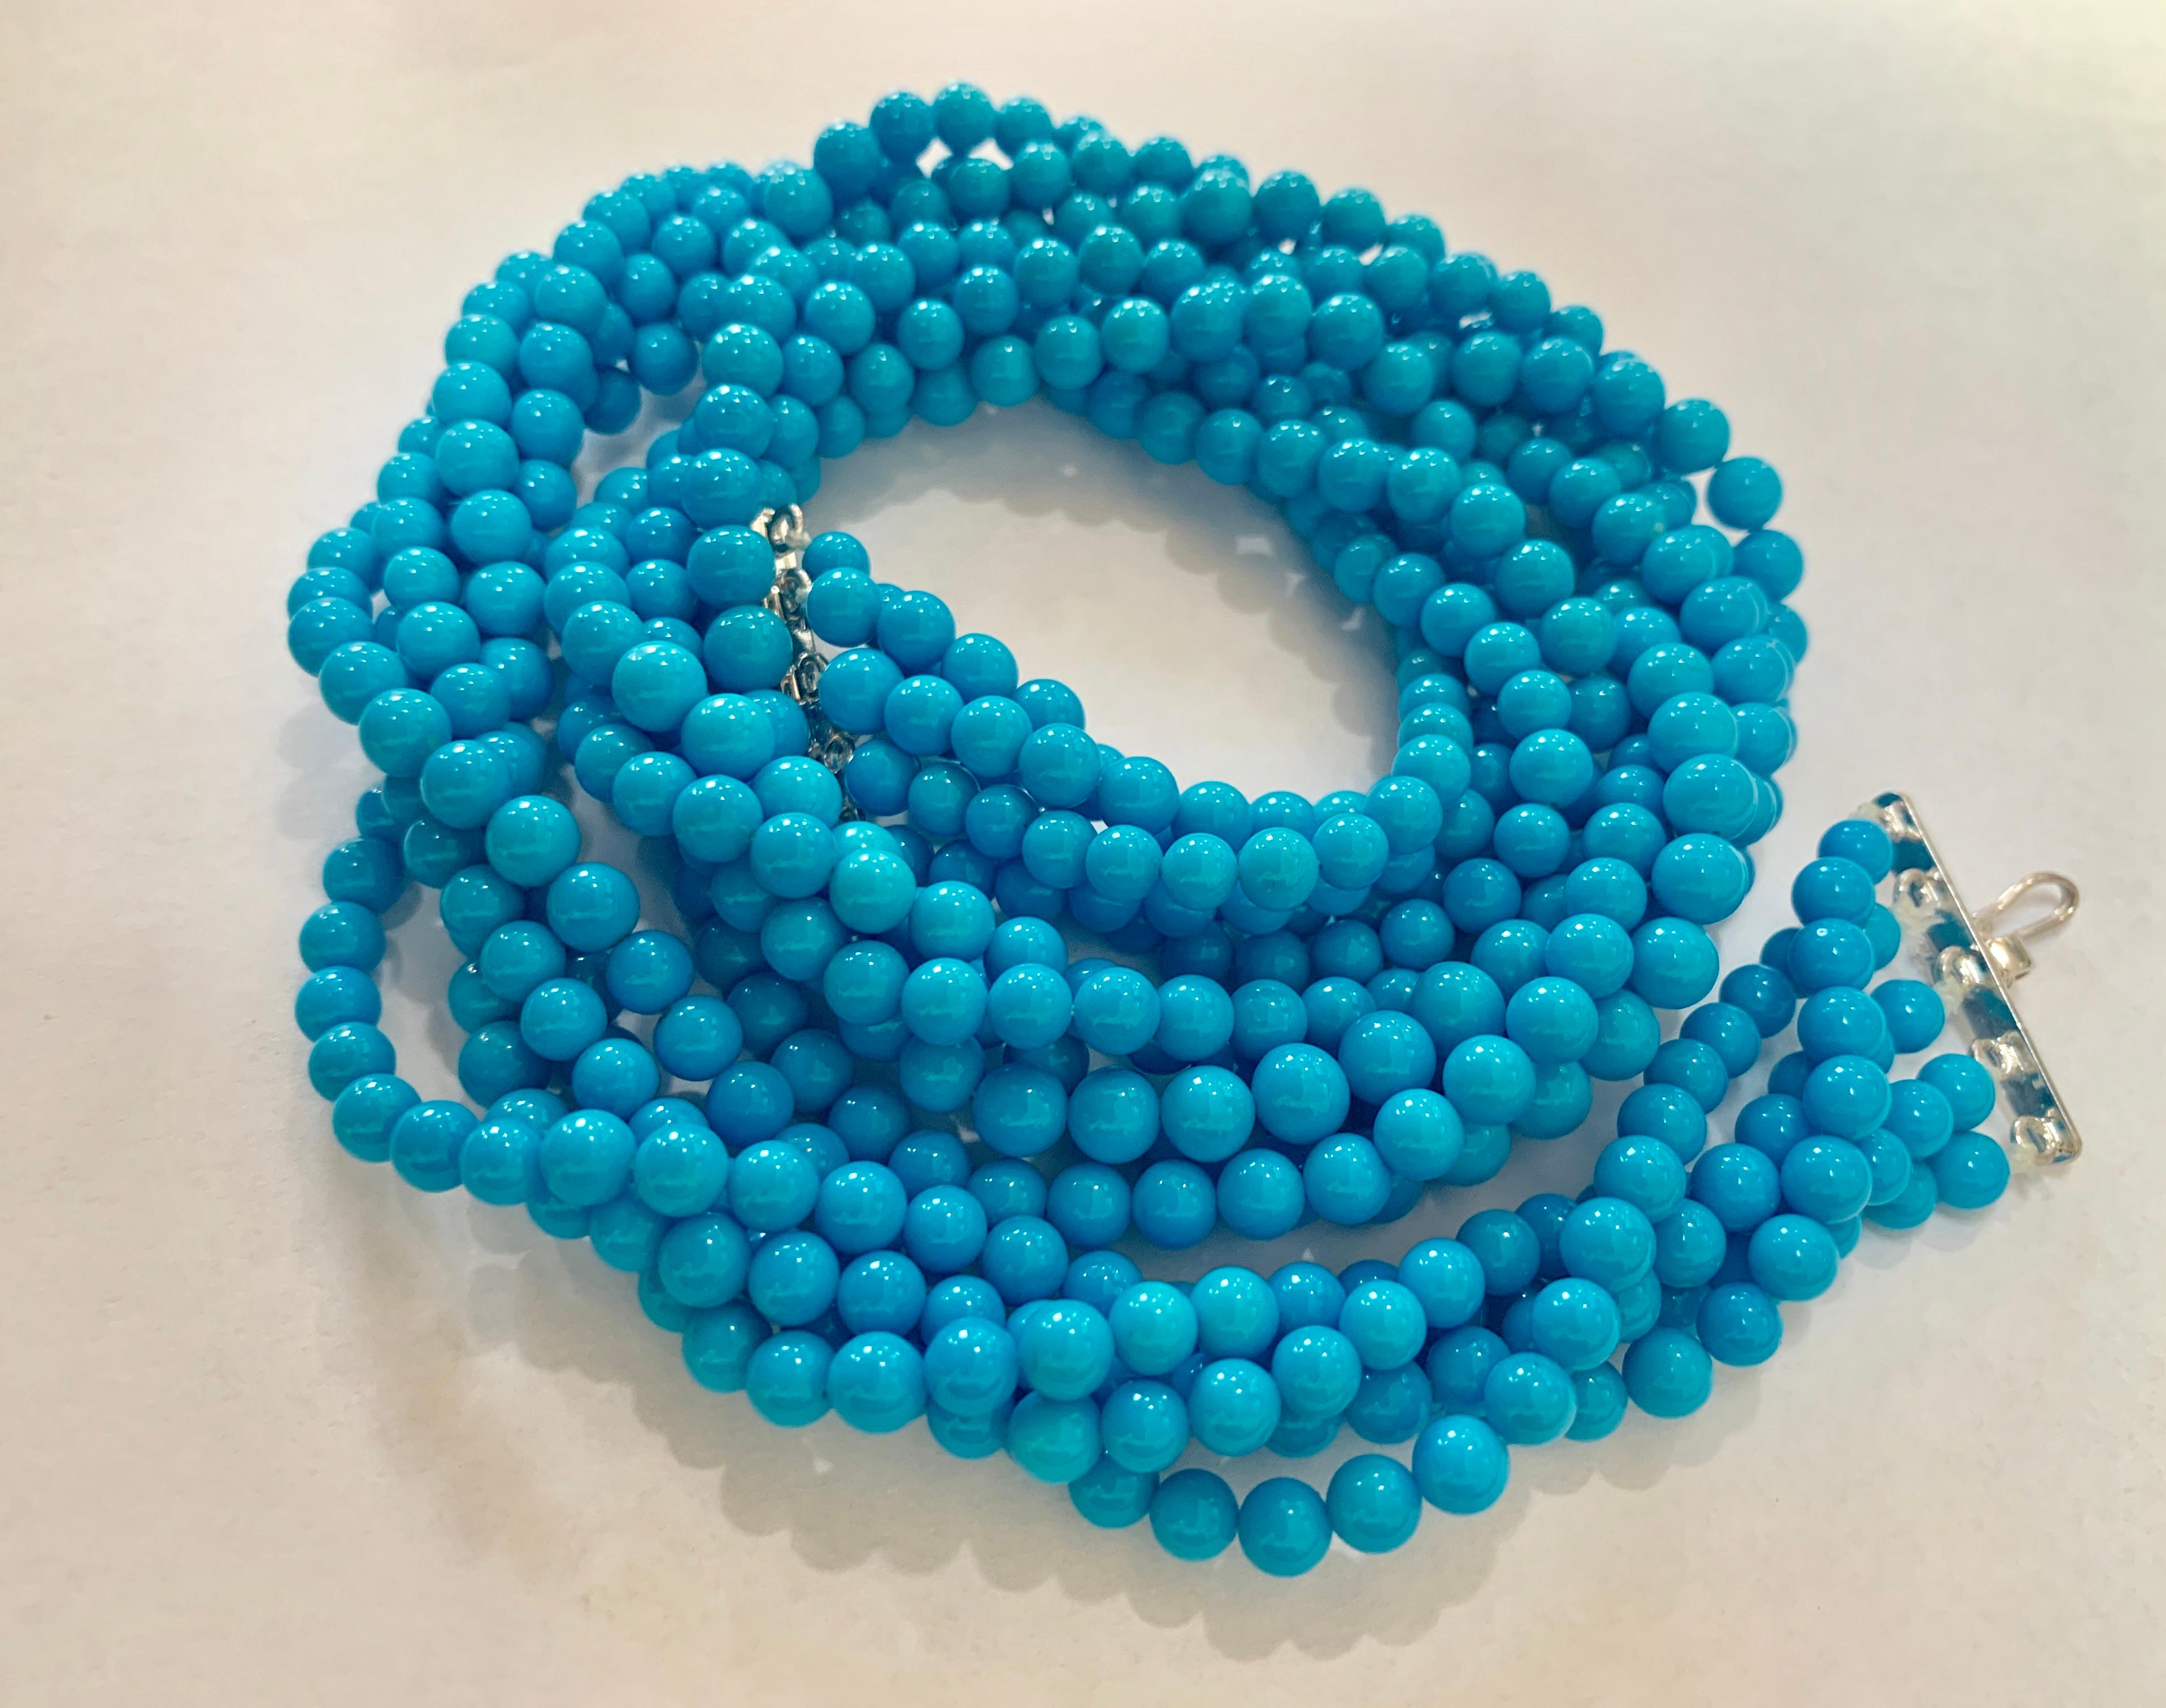 465 Carat Natural Sleeping Beauty Turquoise Necklace, Multi Strand 18 Karat Gold For Sale 1